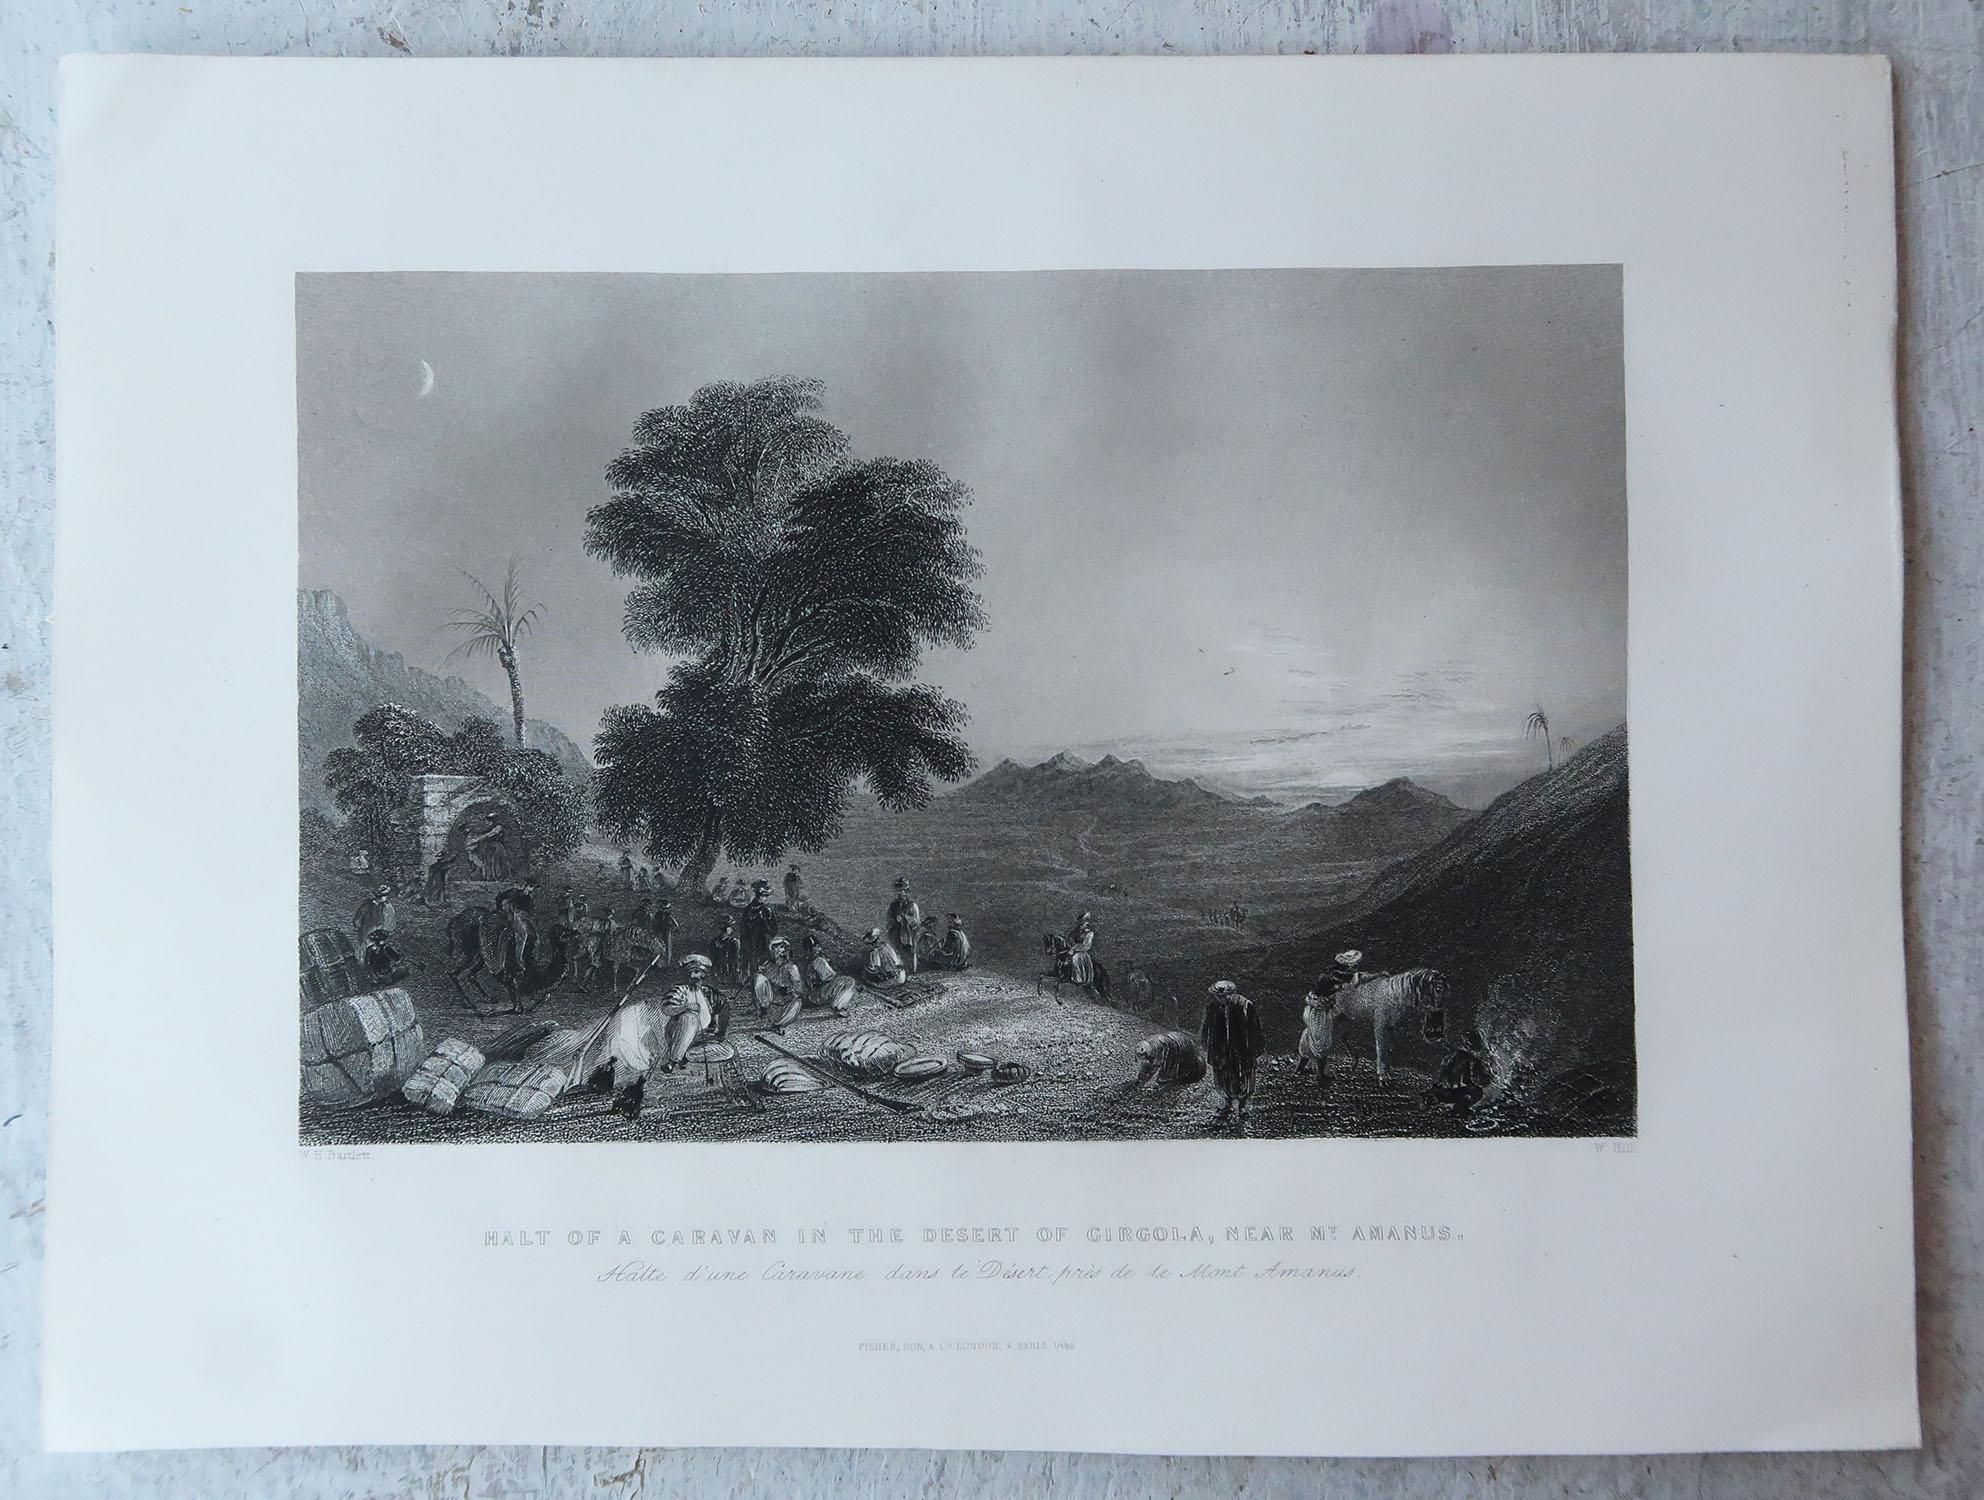 Mid-19th Century Set of 12 Original Antique Prints of the Levant / Holy Land /Middle East. C 1840